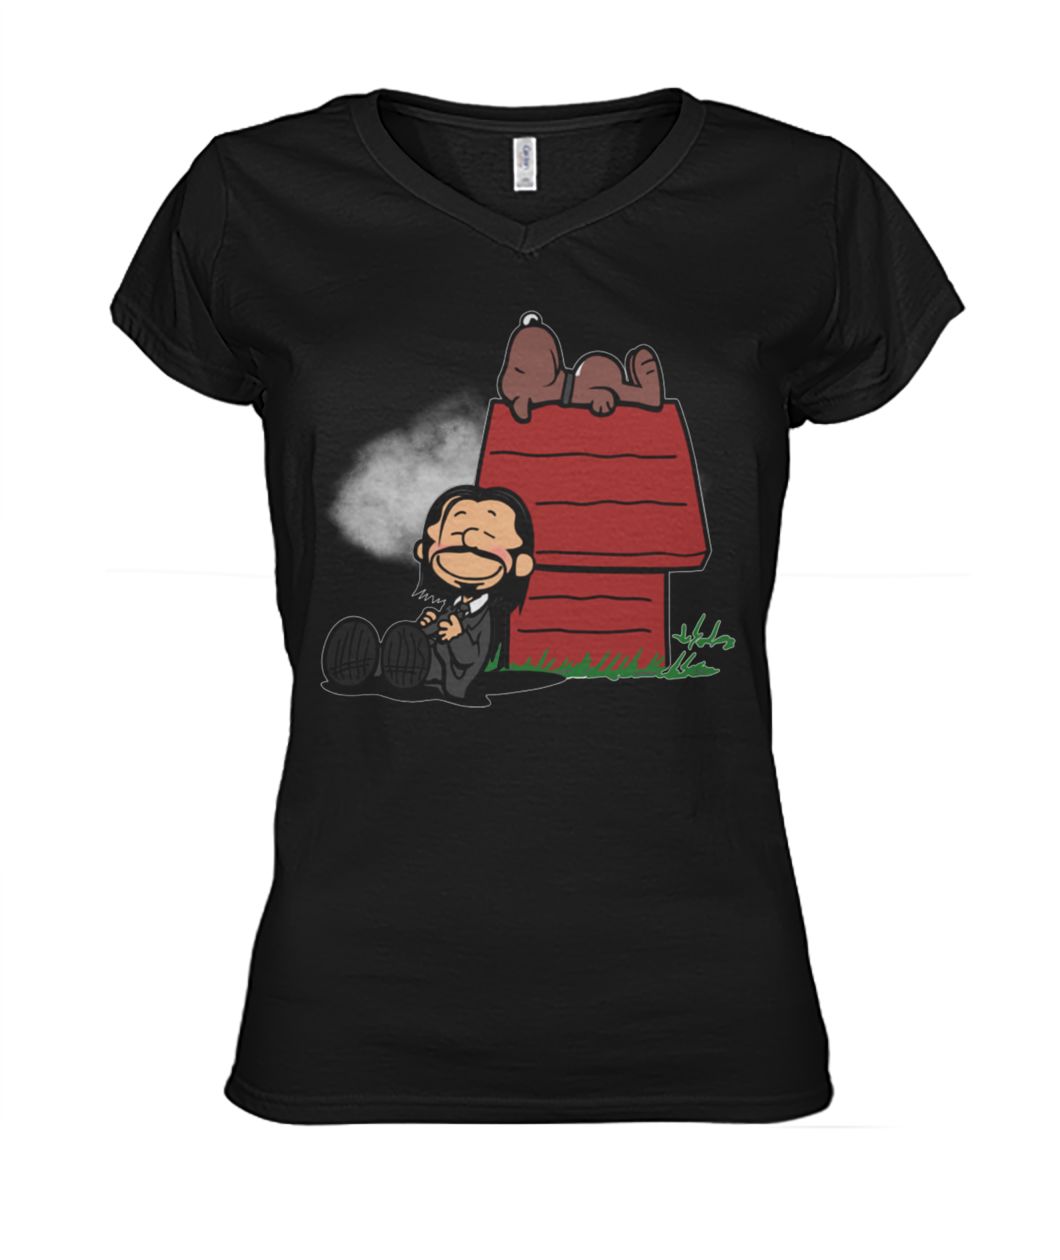 John wick and dog in the style of peanuts charlie brown and snoopy women's v-neck